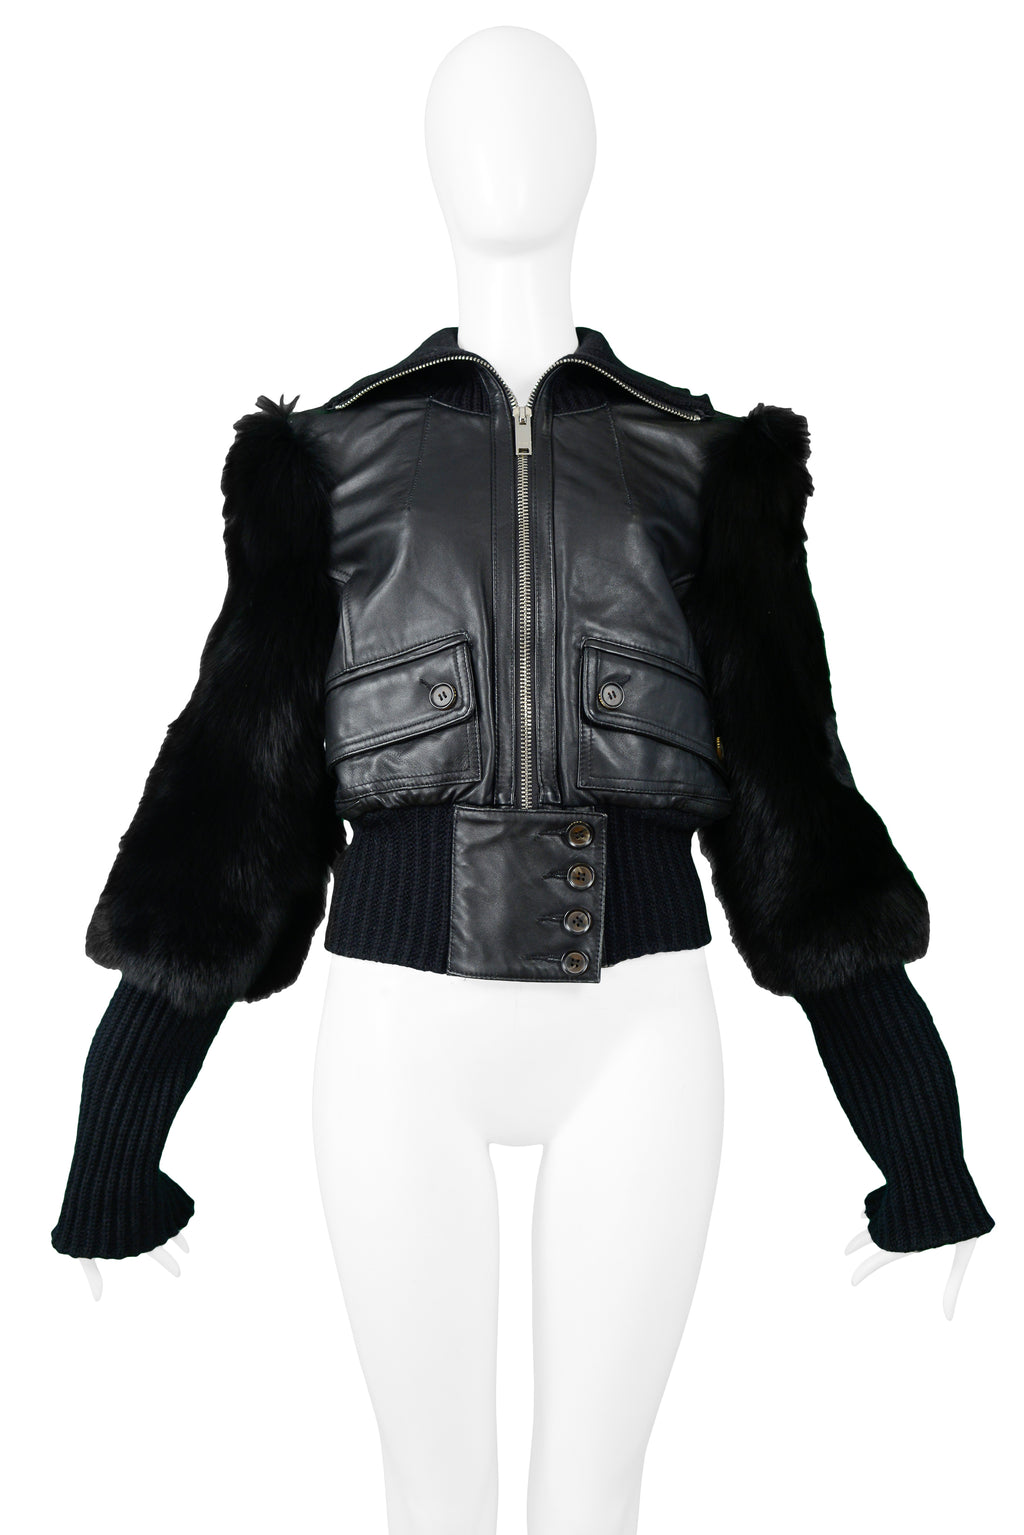 Gucci Leather Jacket With Fur